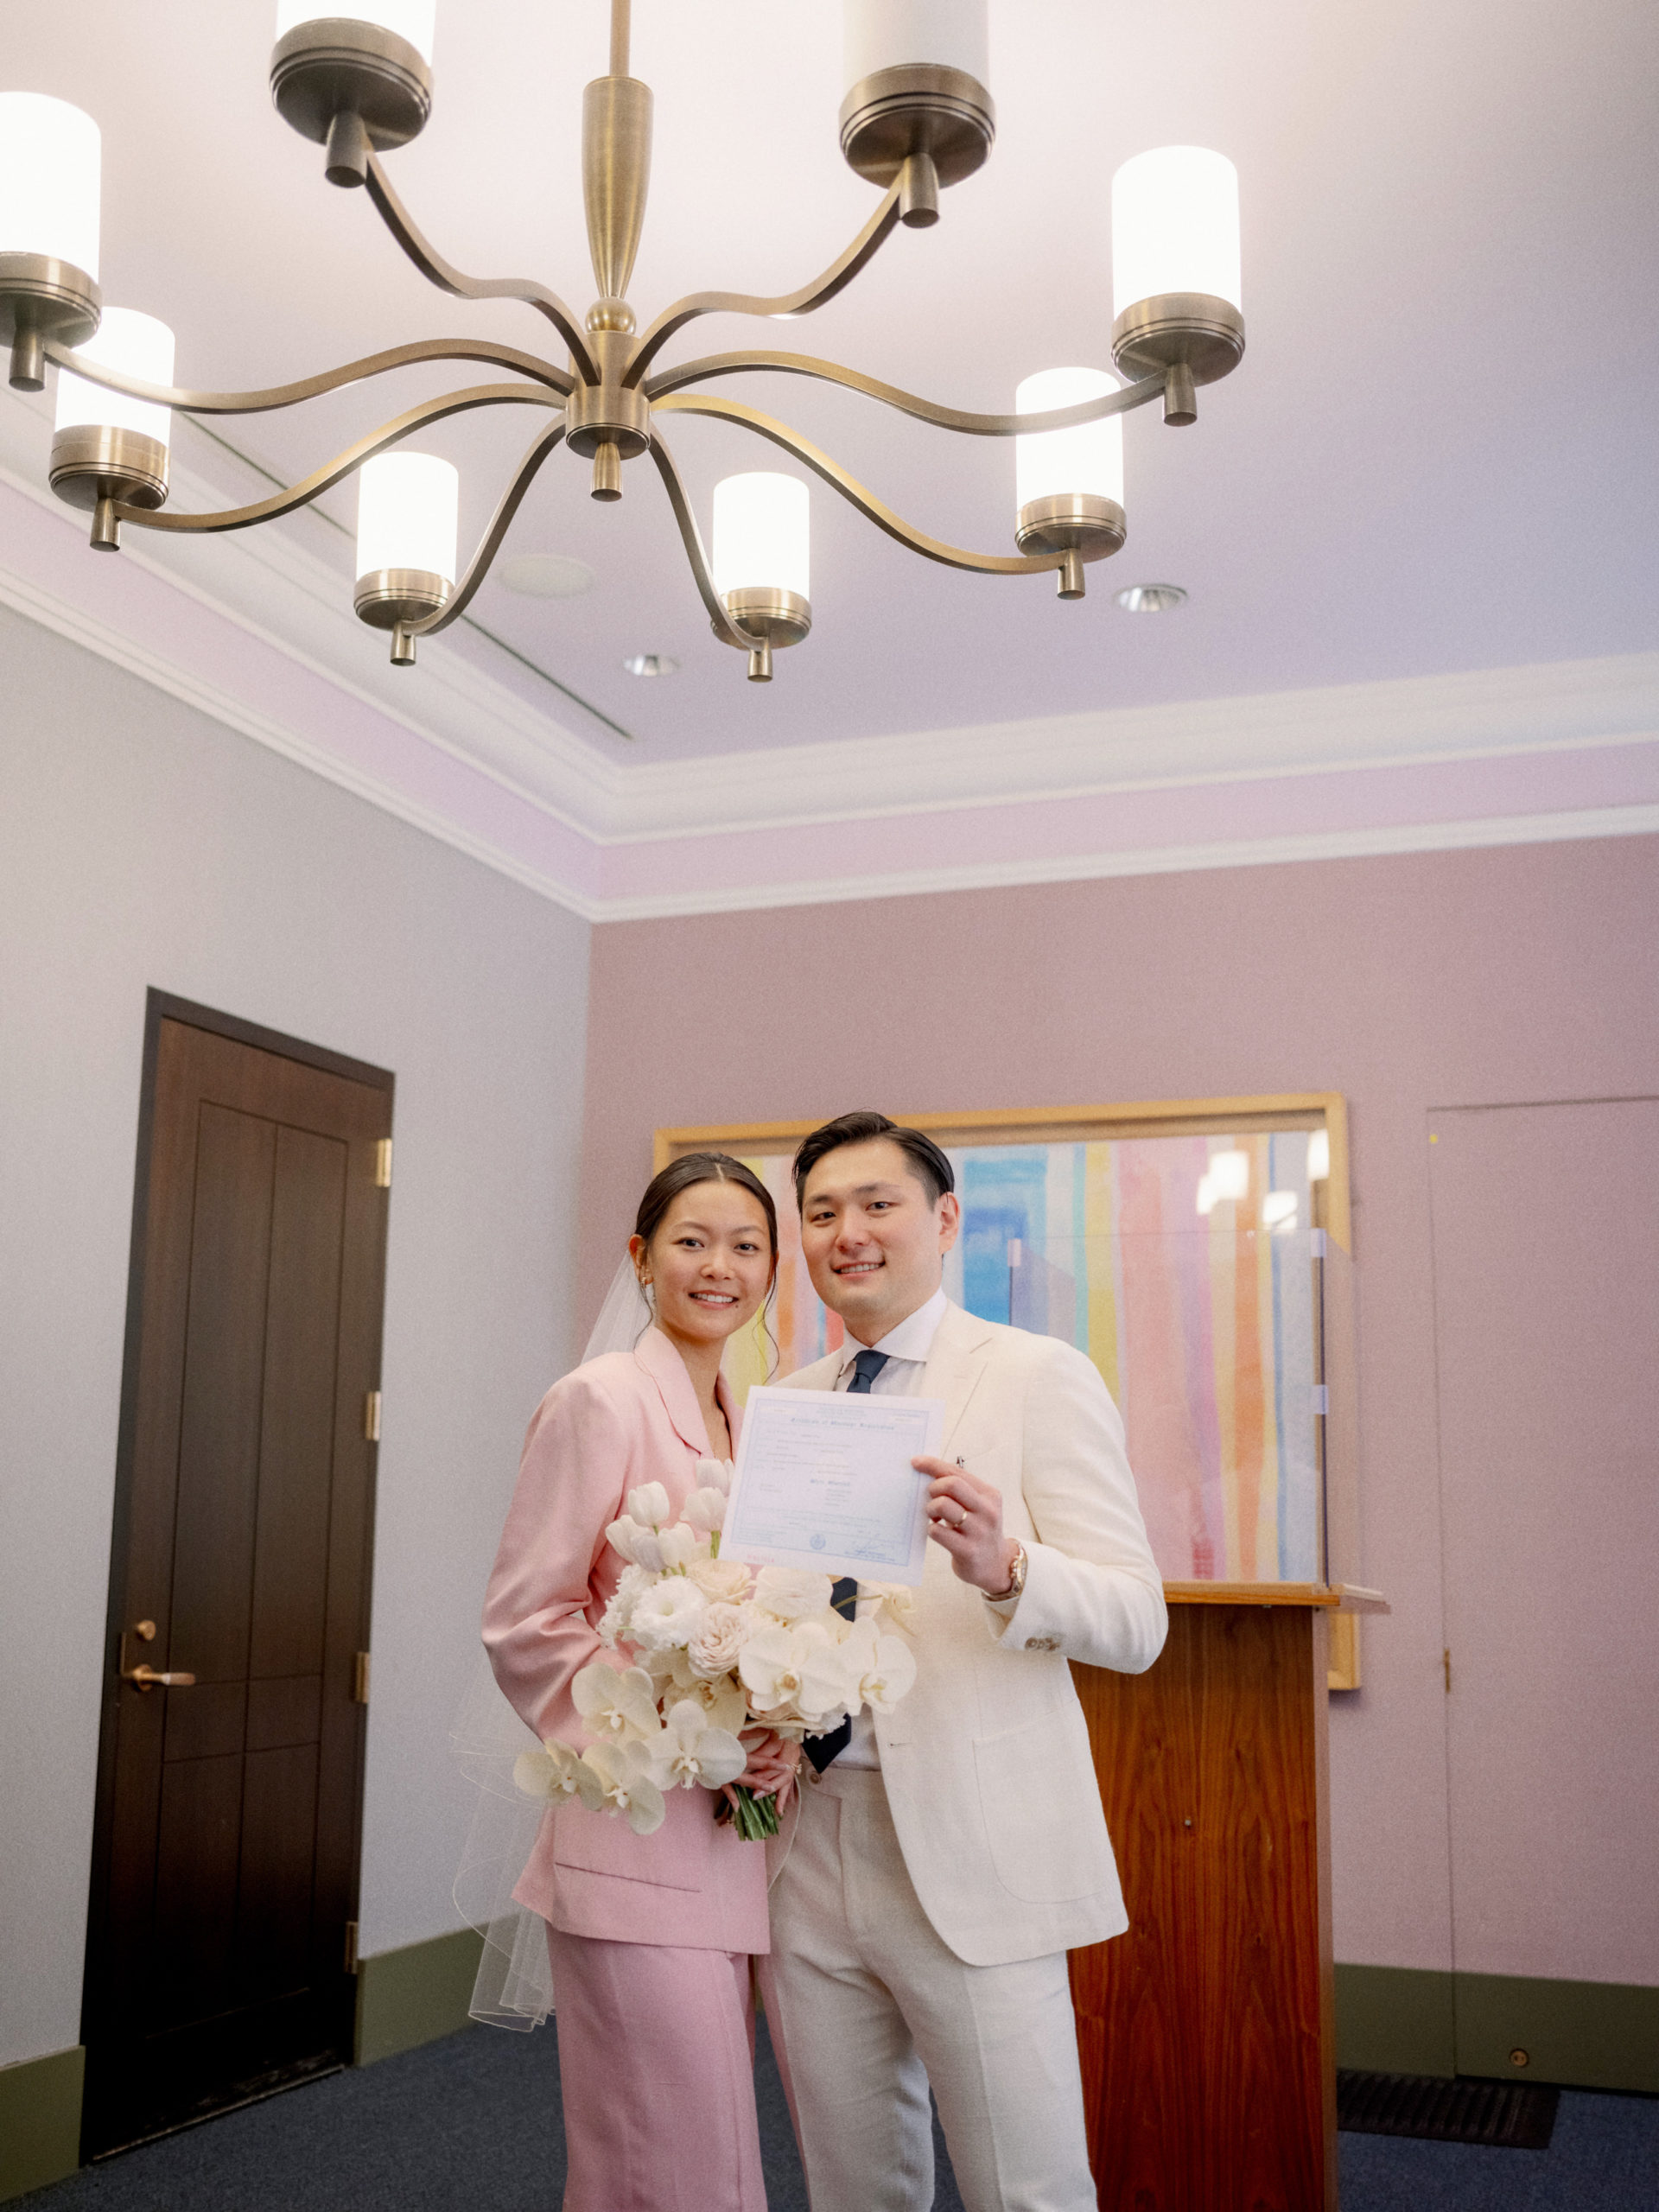 The newly-weds are holding their marriage certificate. Image by Jenny Fu Studio